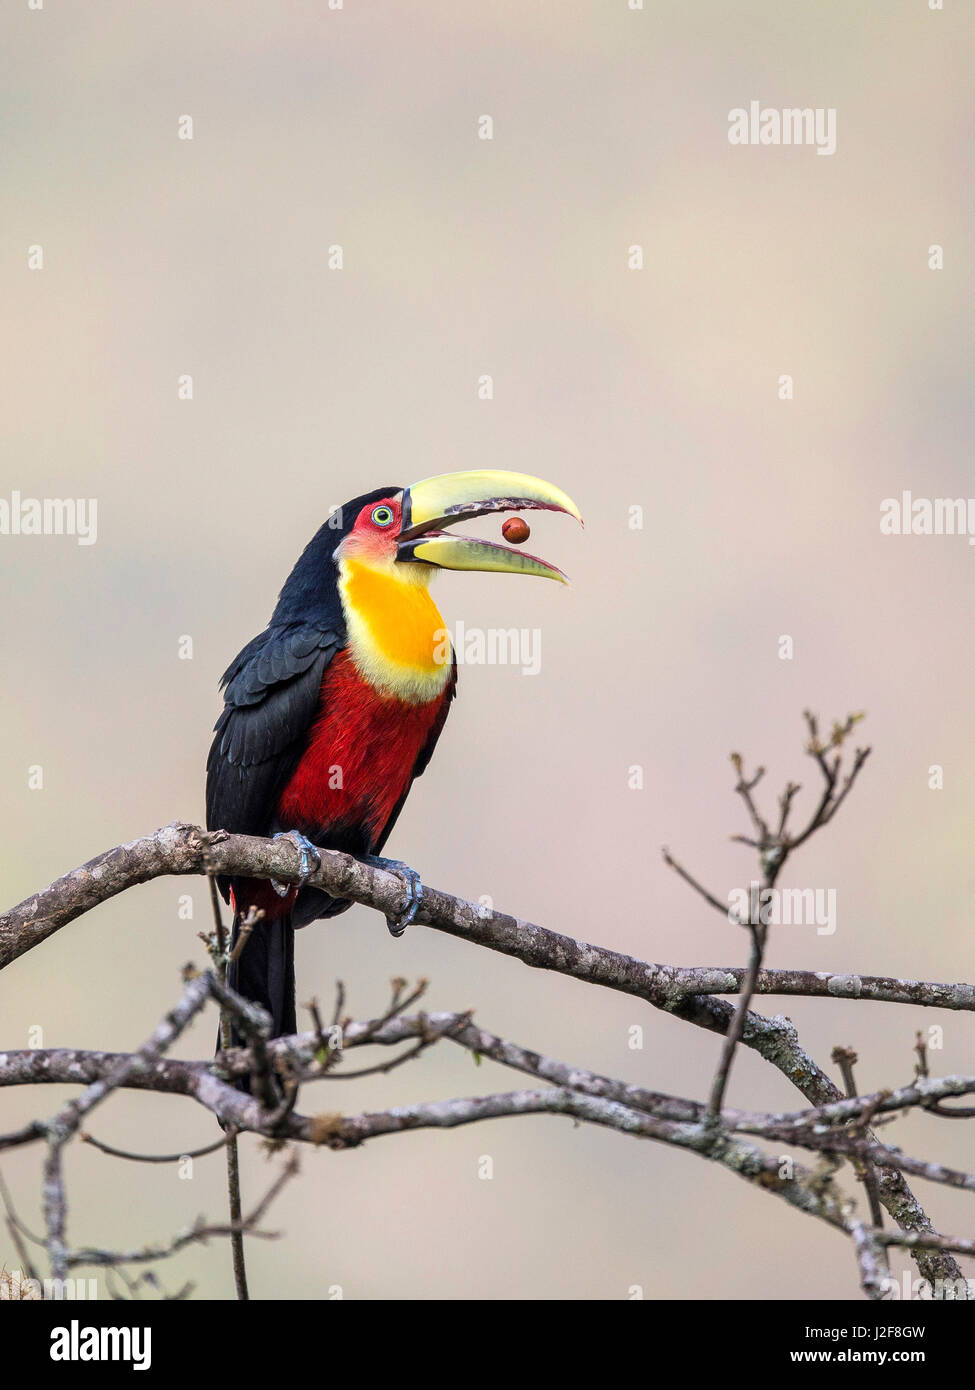 Green-billed toucan plays with berry Stock Photo